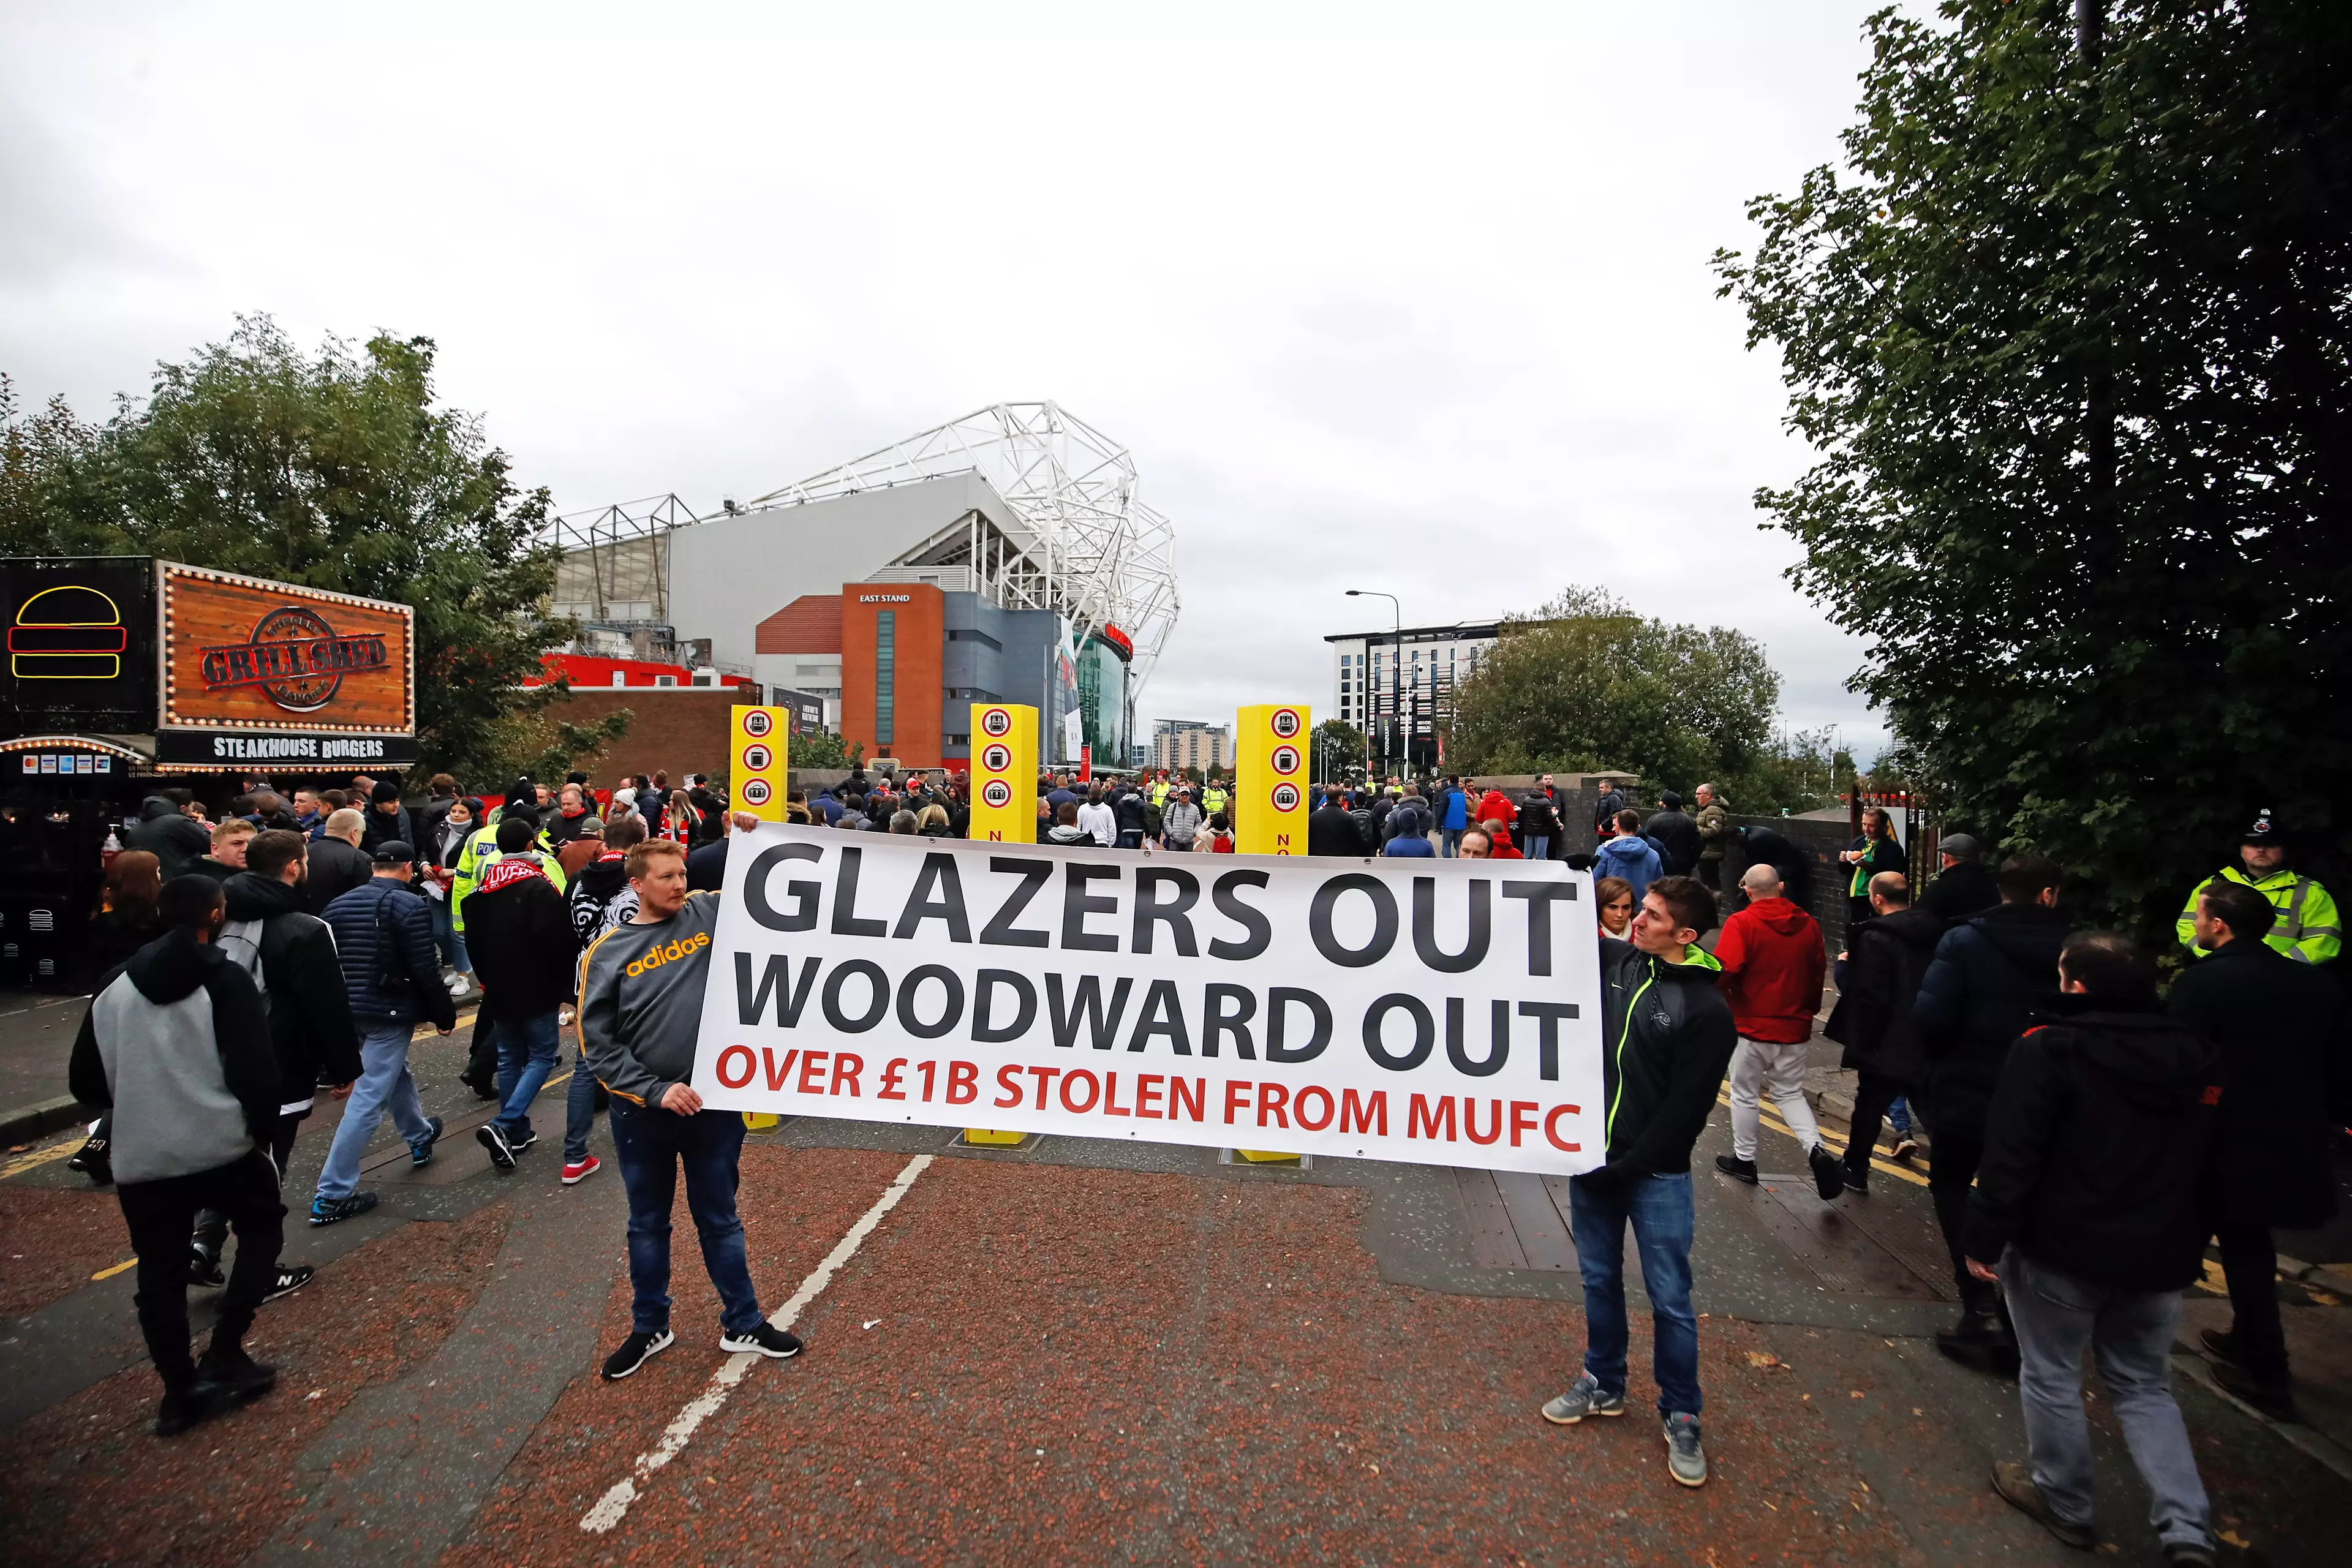 Fans protest the Glazers earlier this season. Image: PA Images